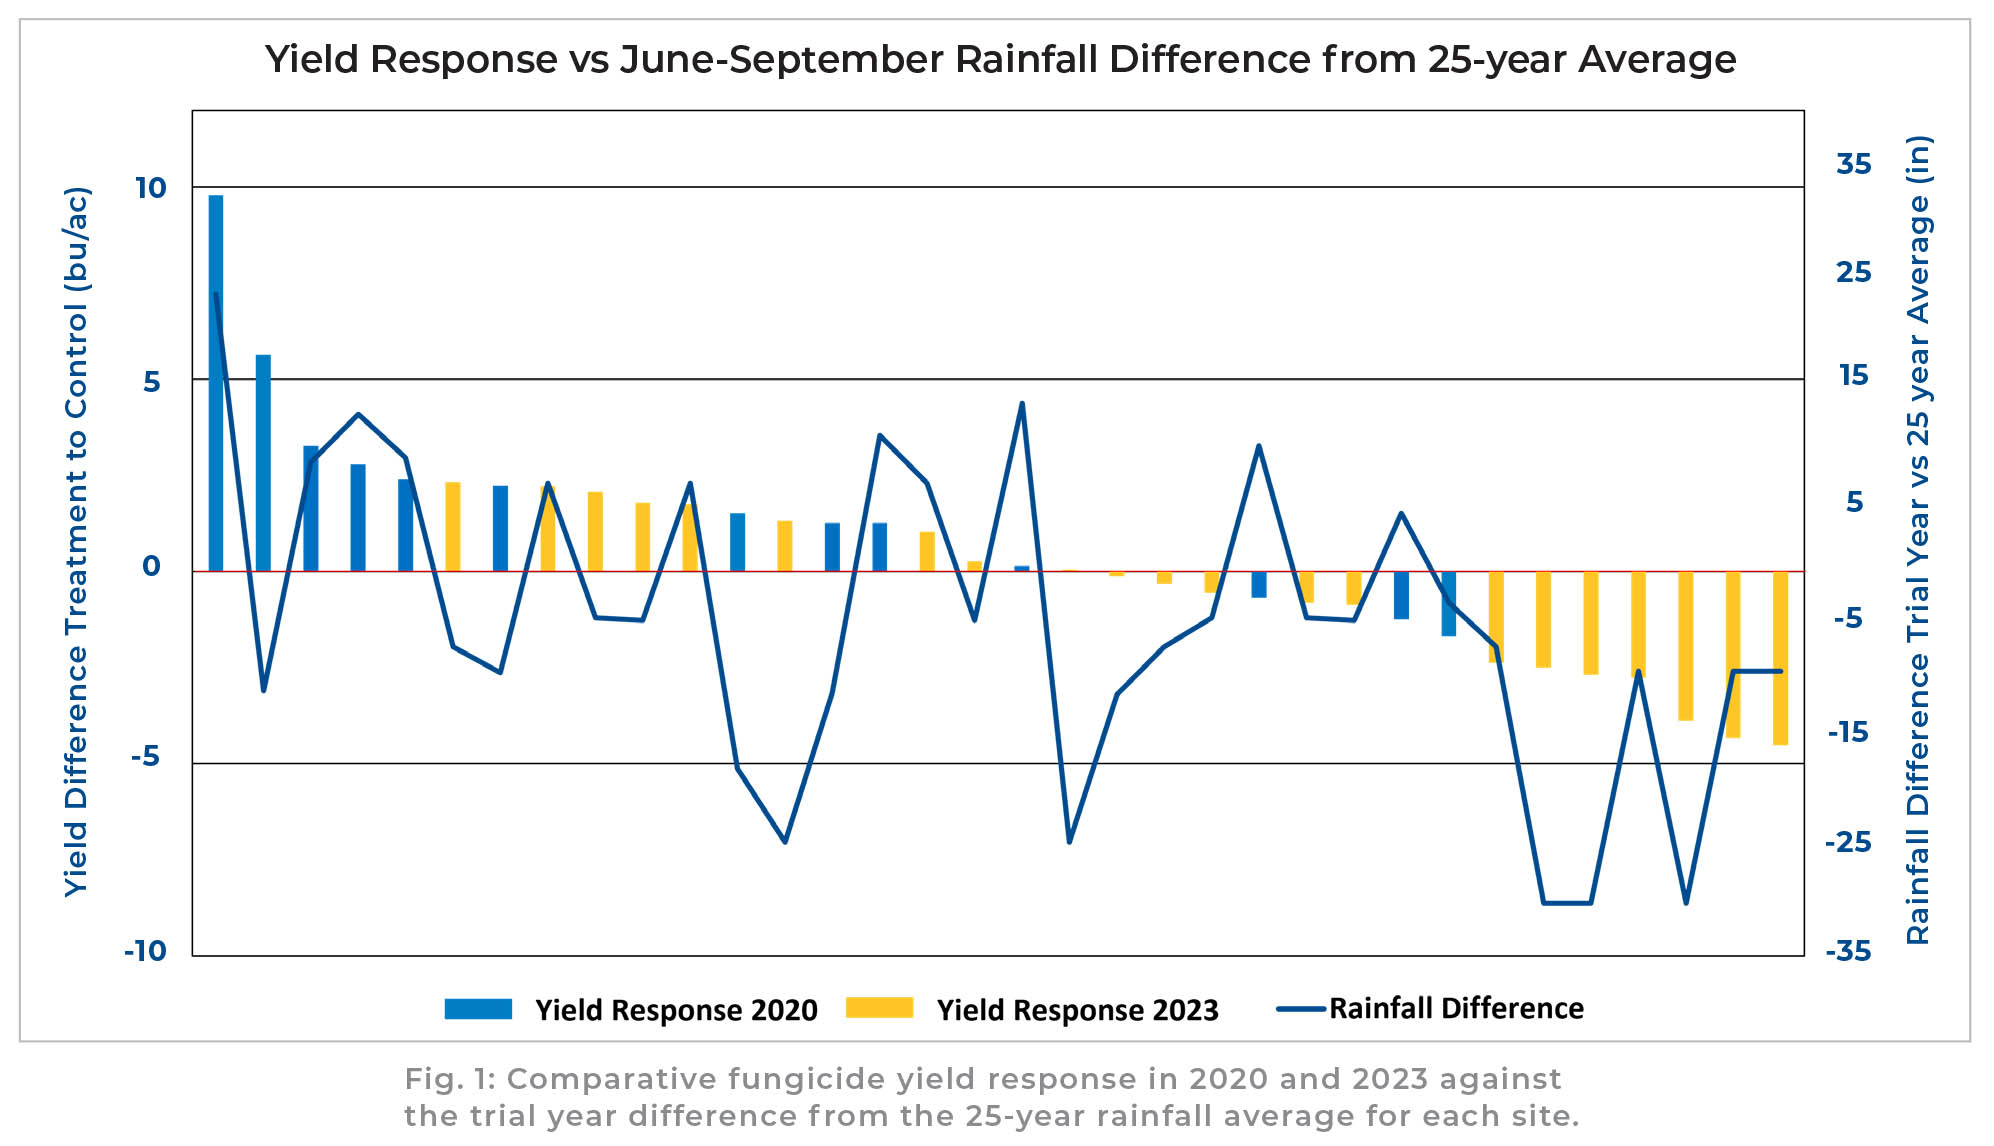 Comparative fungicide yield response data